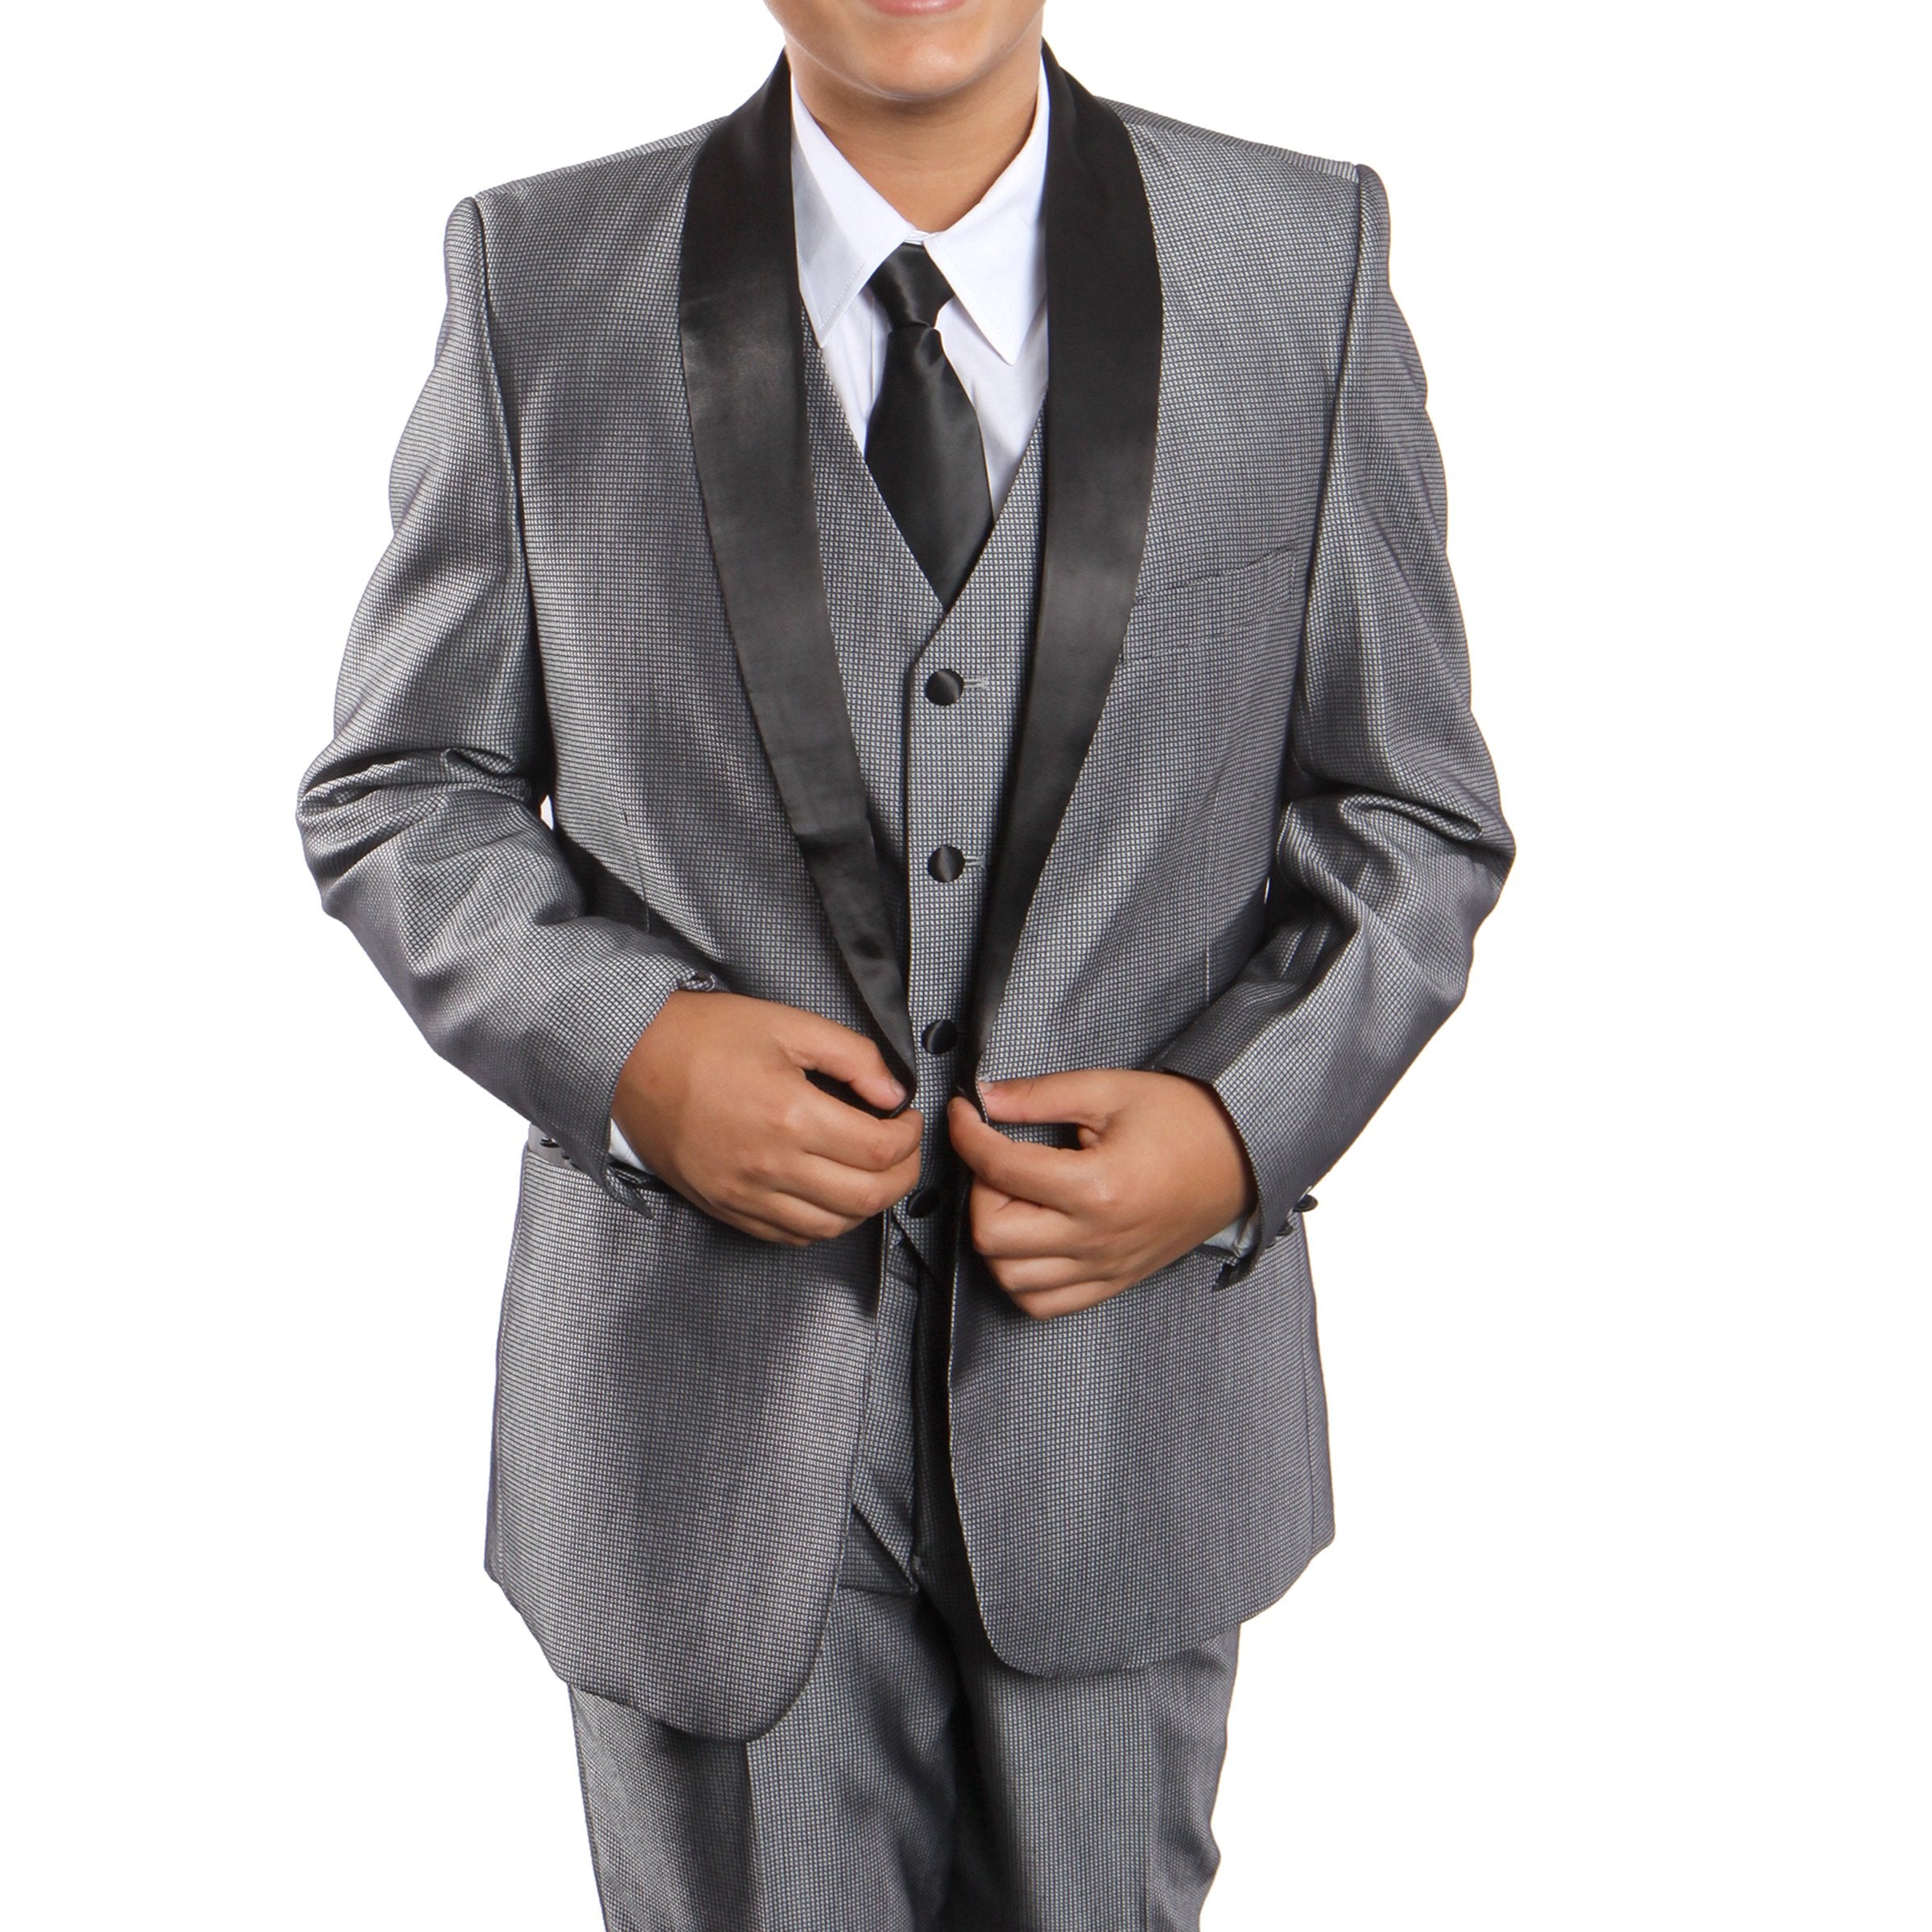 3-Piece Boy's Shawl Collar Suit With Shirt & Tie Suits For Boy's